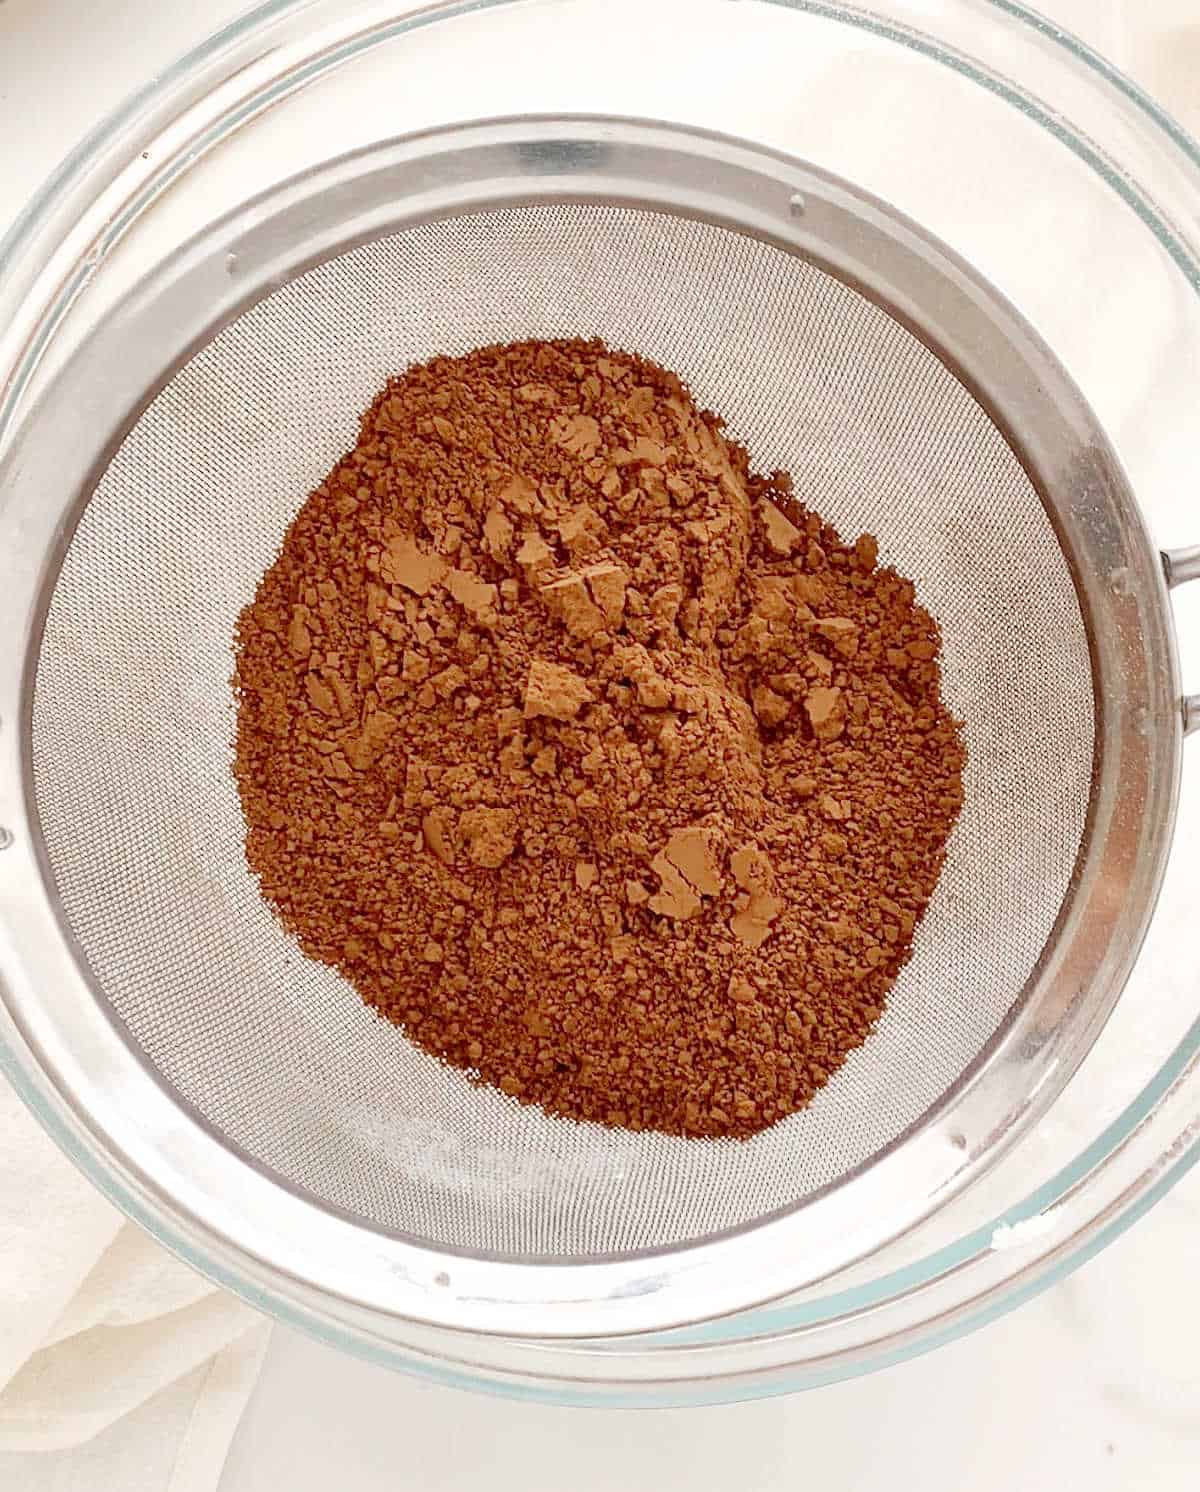 Sifting cocoa powder into a glass bowl on a white surface.